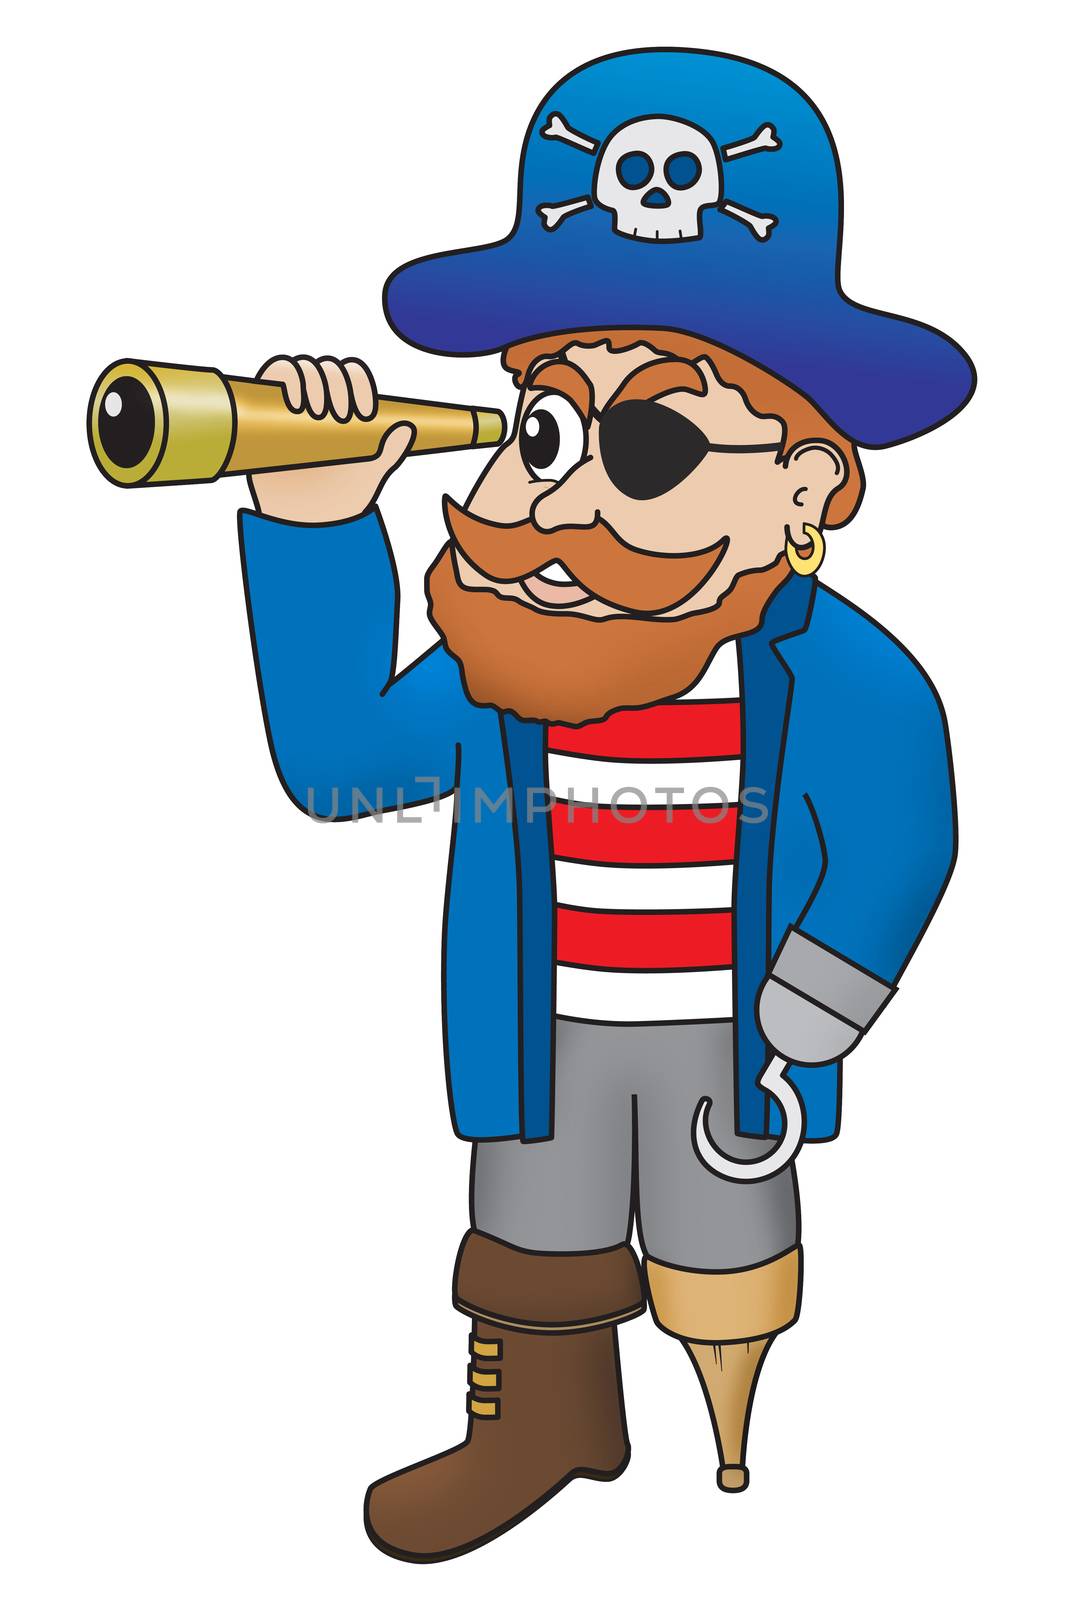 Cartoon illustration of pirate looking through a spyglass by Balefire9